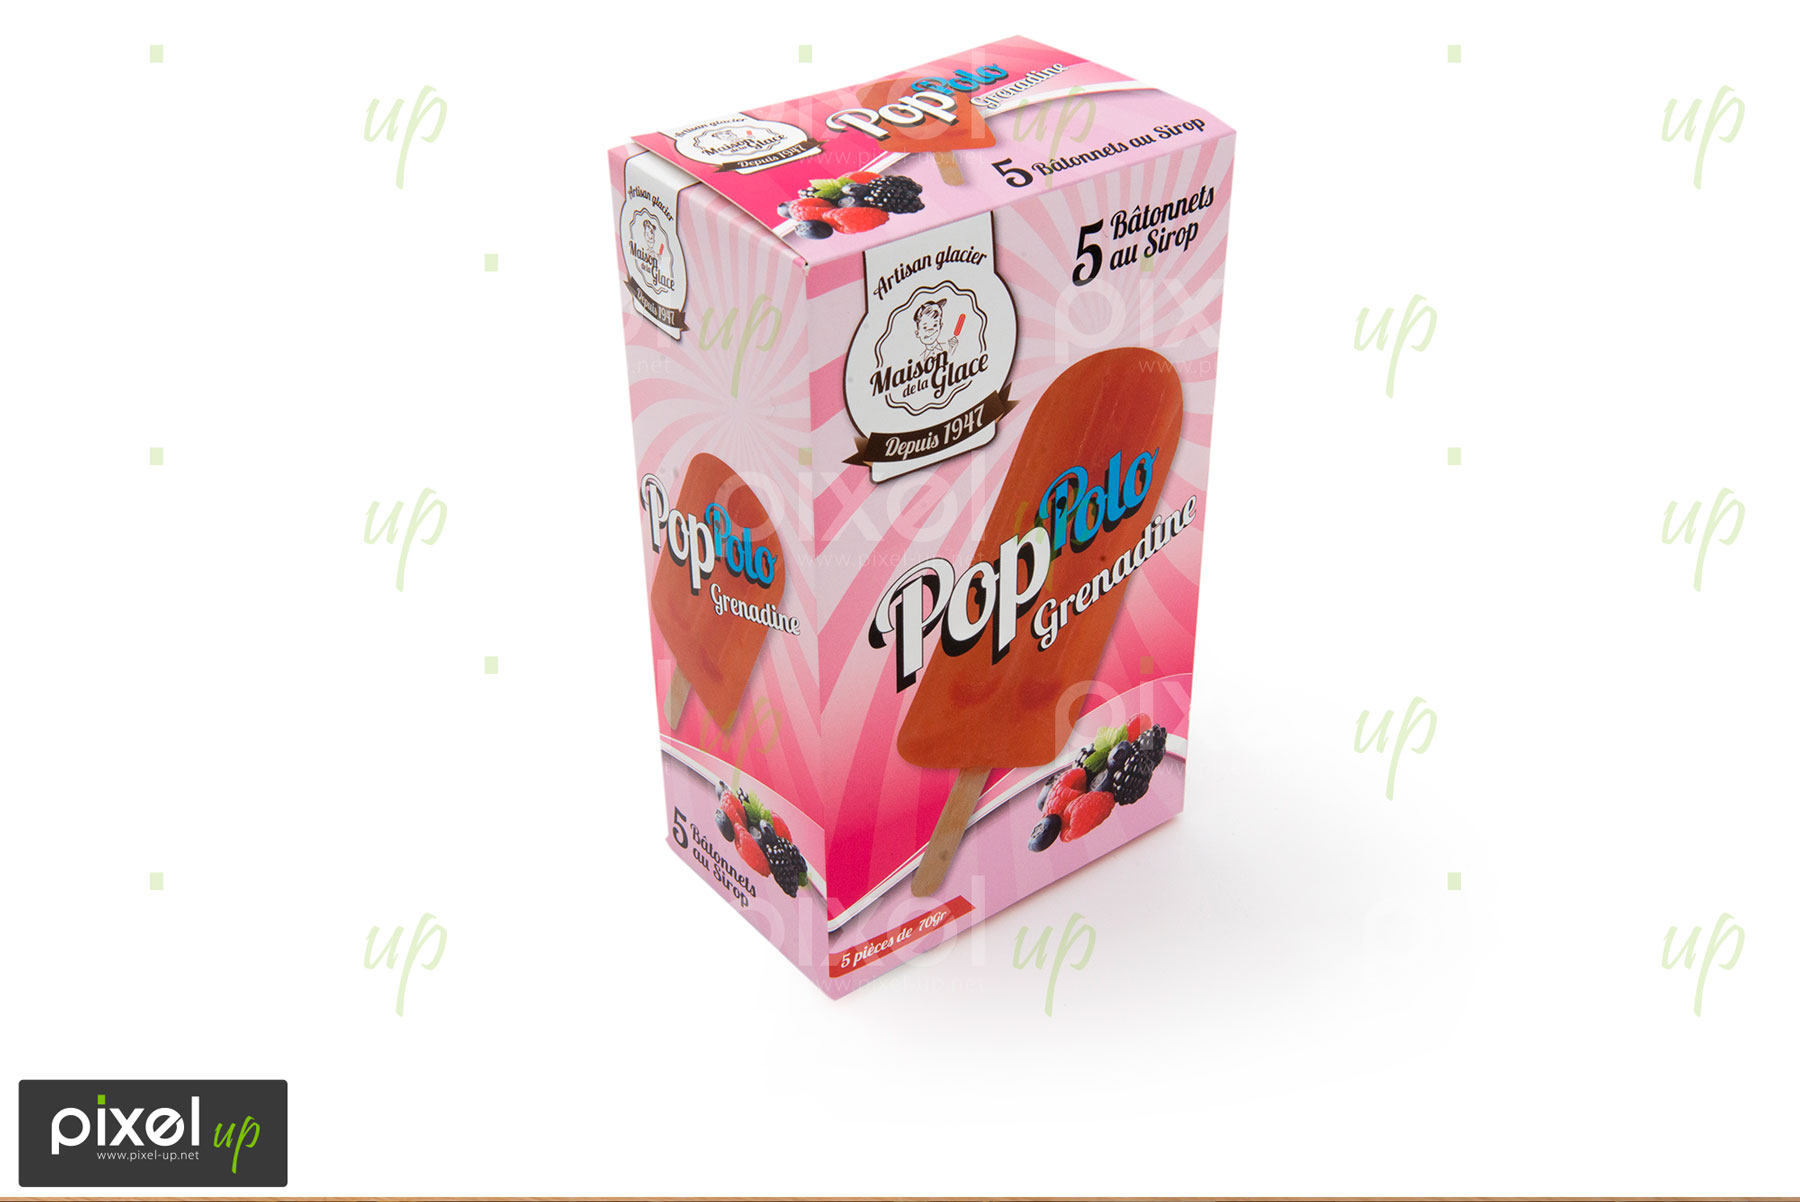 Photographe Pixel up - Création Packaging PopPolo